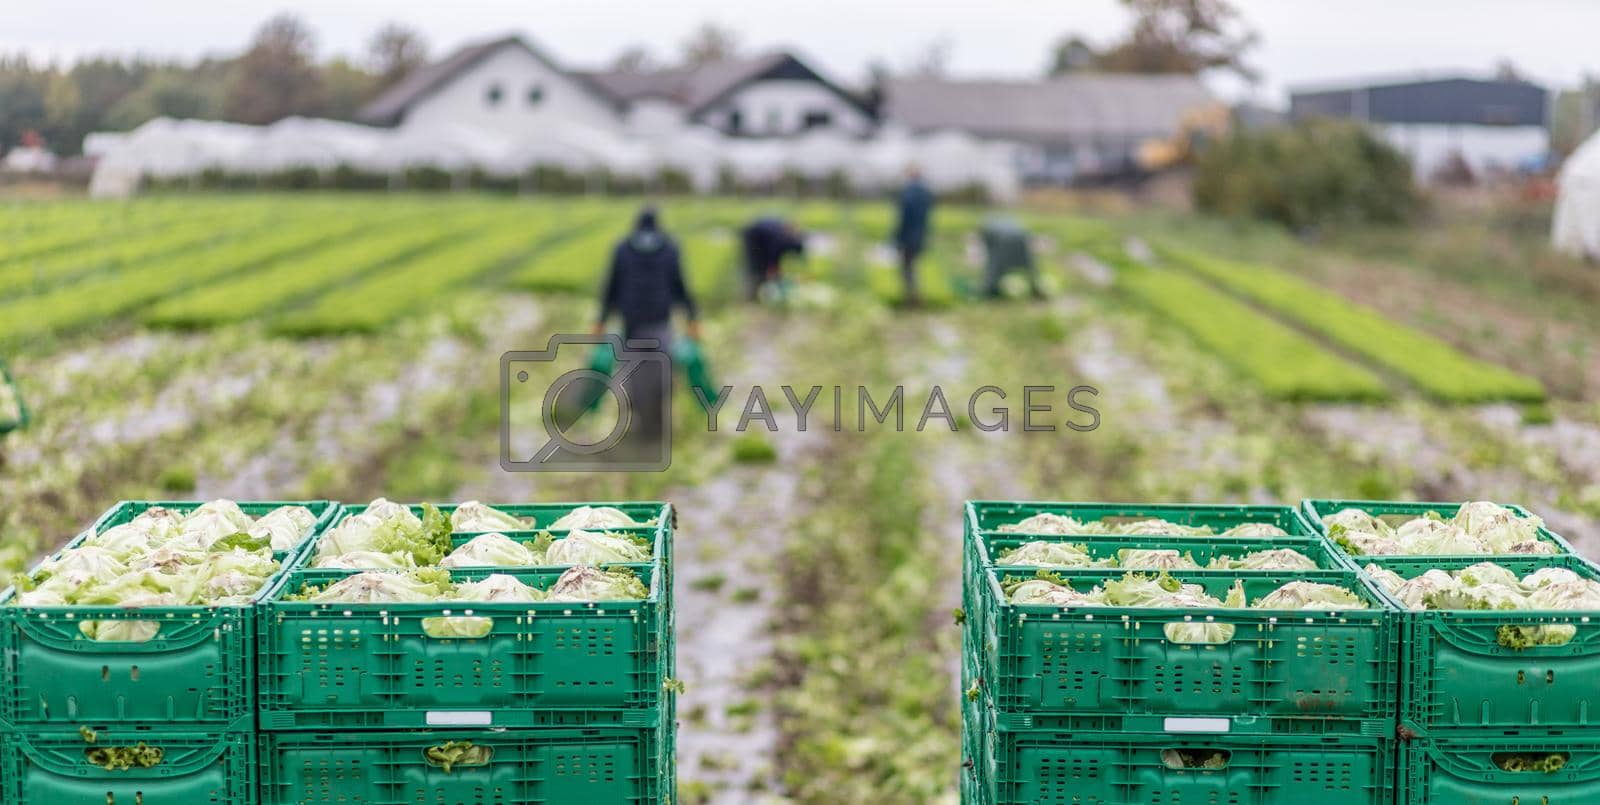 Royalty free image of Letuce heads in wooden baskets after manual harvest on organic letuce farm. Agriculture and ecological farming concept. by kasto